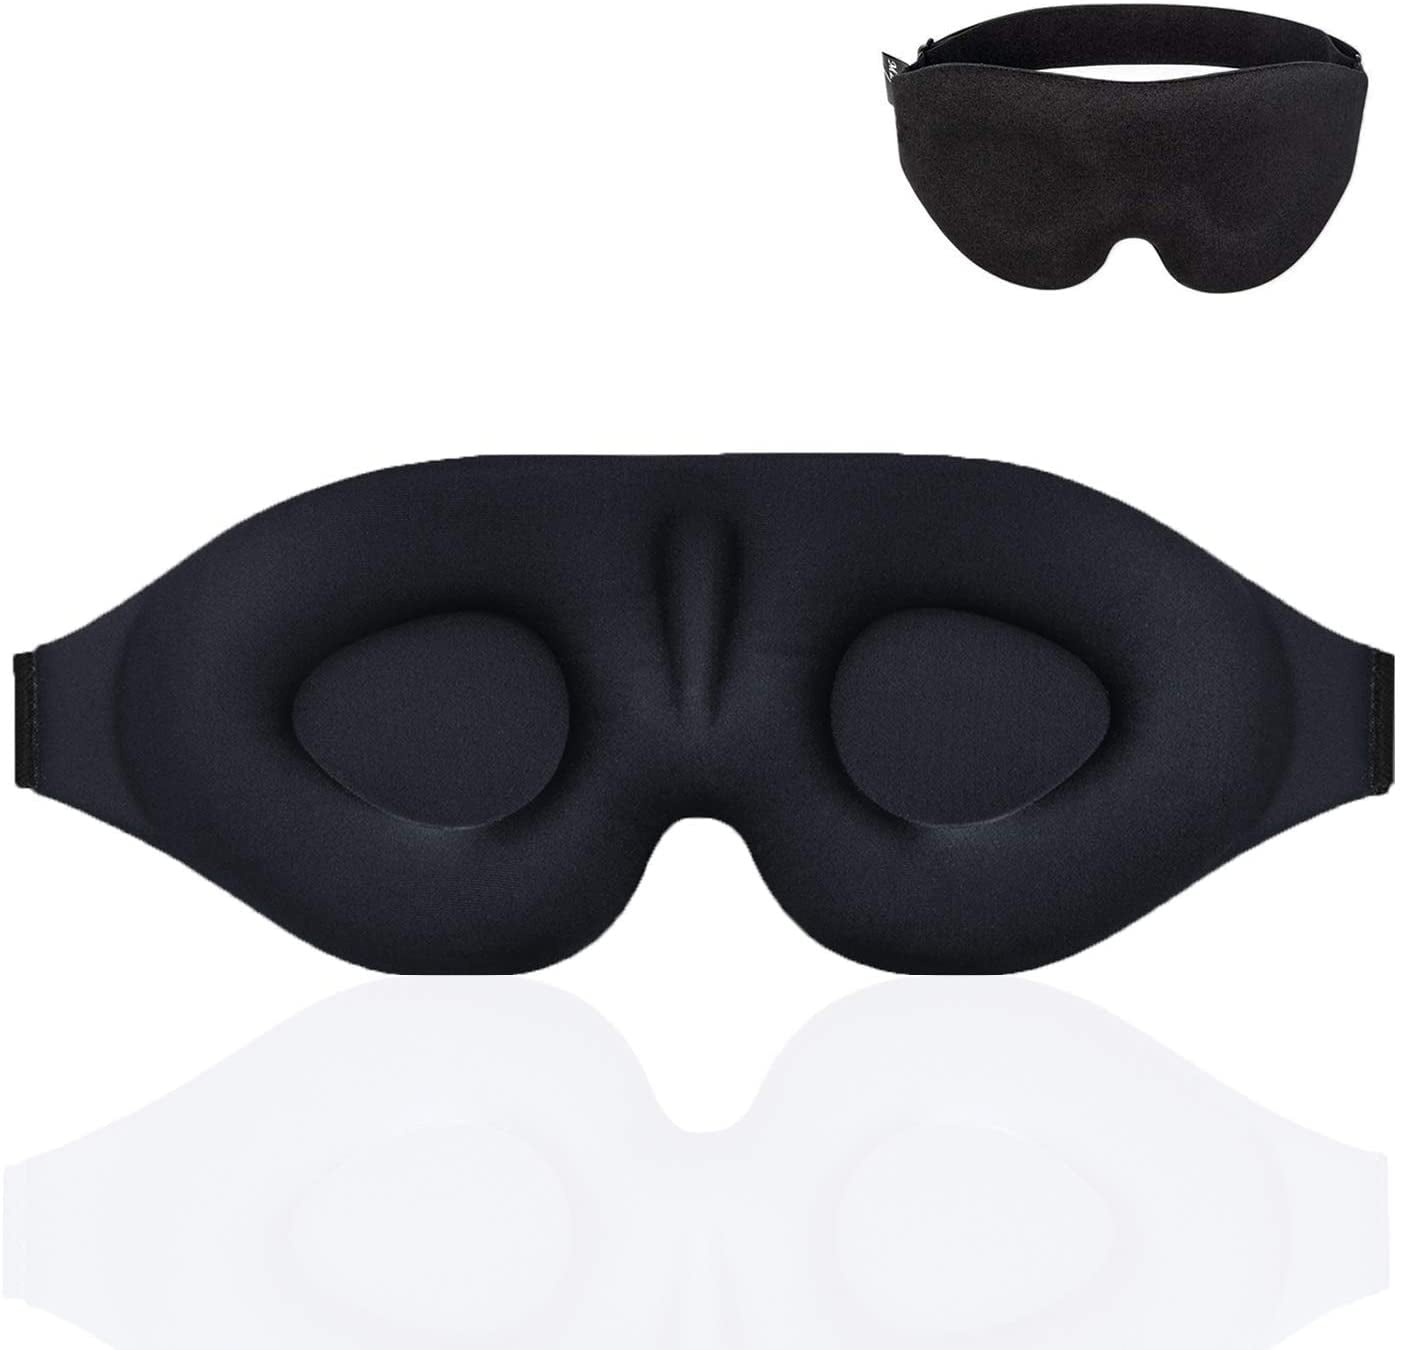 Deenee's 3D Sleep Mask for Women and Men, Eye Mask for Sleeping, Eye Cover  Blackout Masks, Weighted Sleeping Pad, Black Blindfold, Travel Accessories